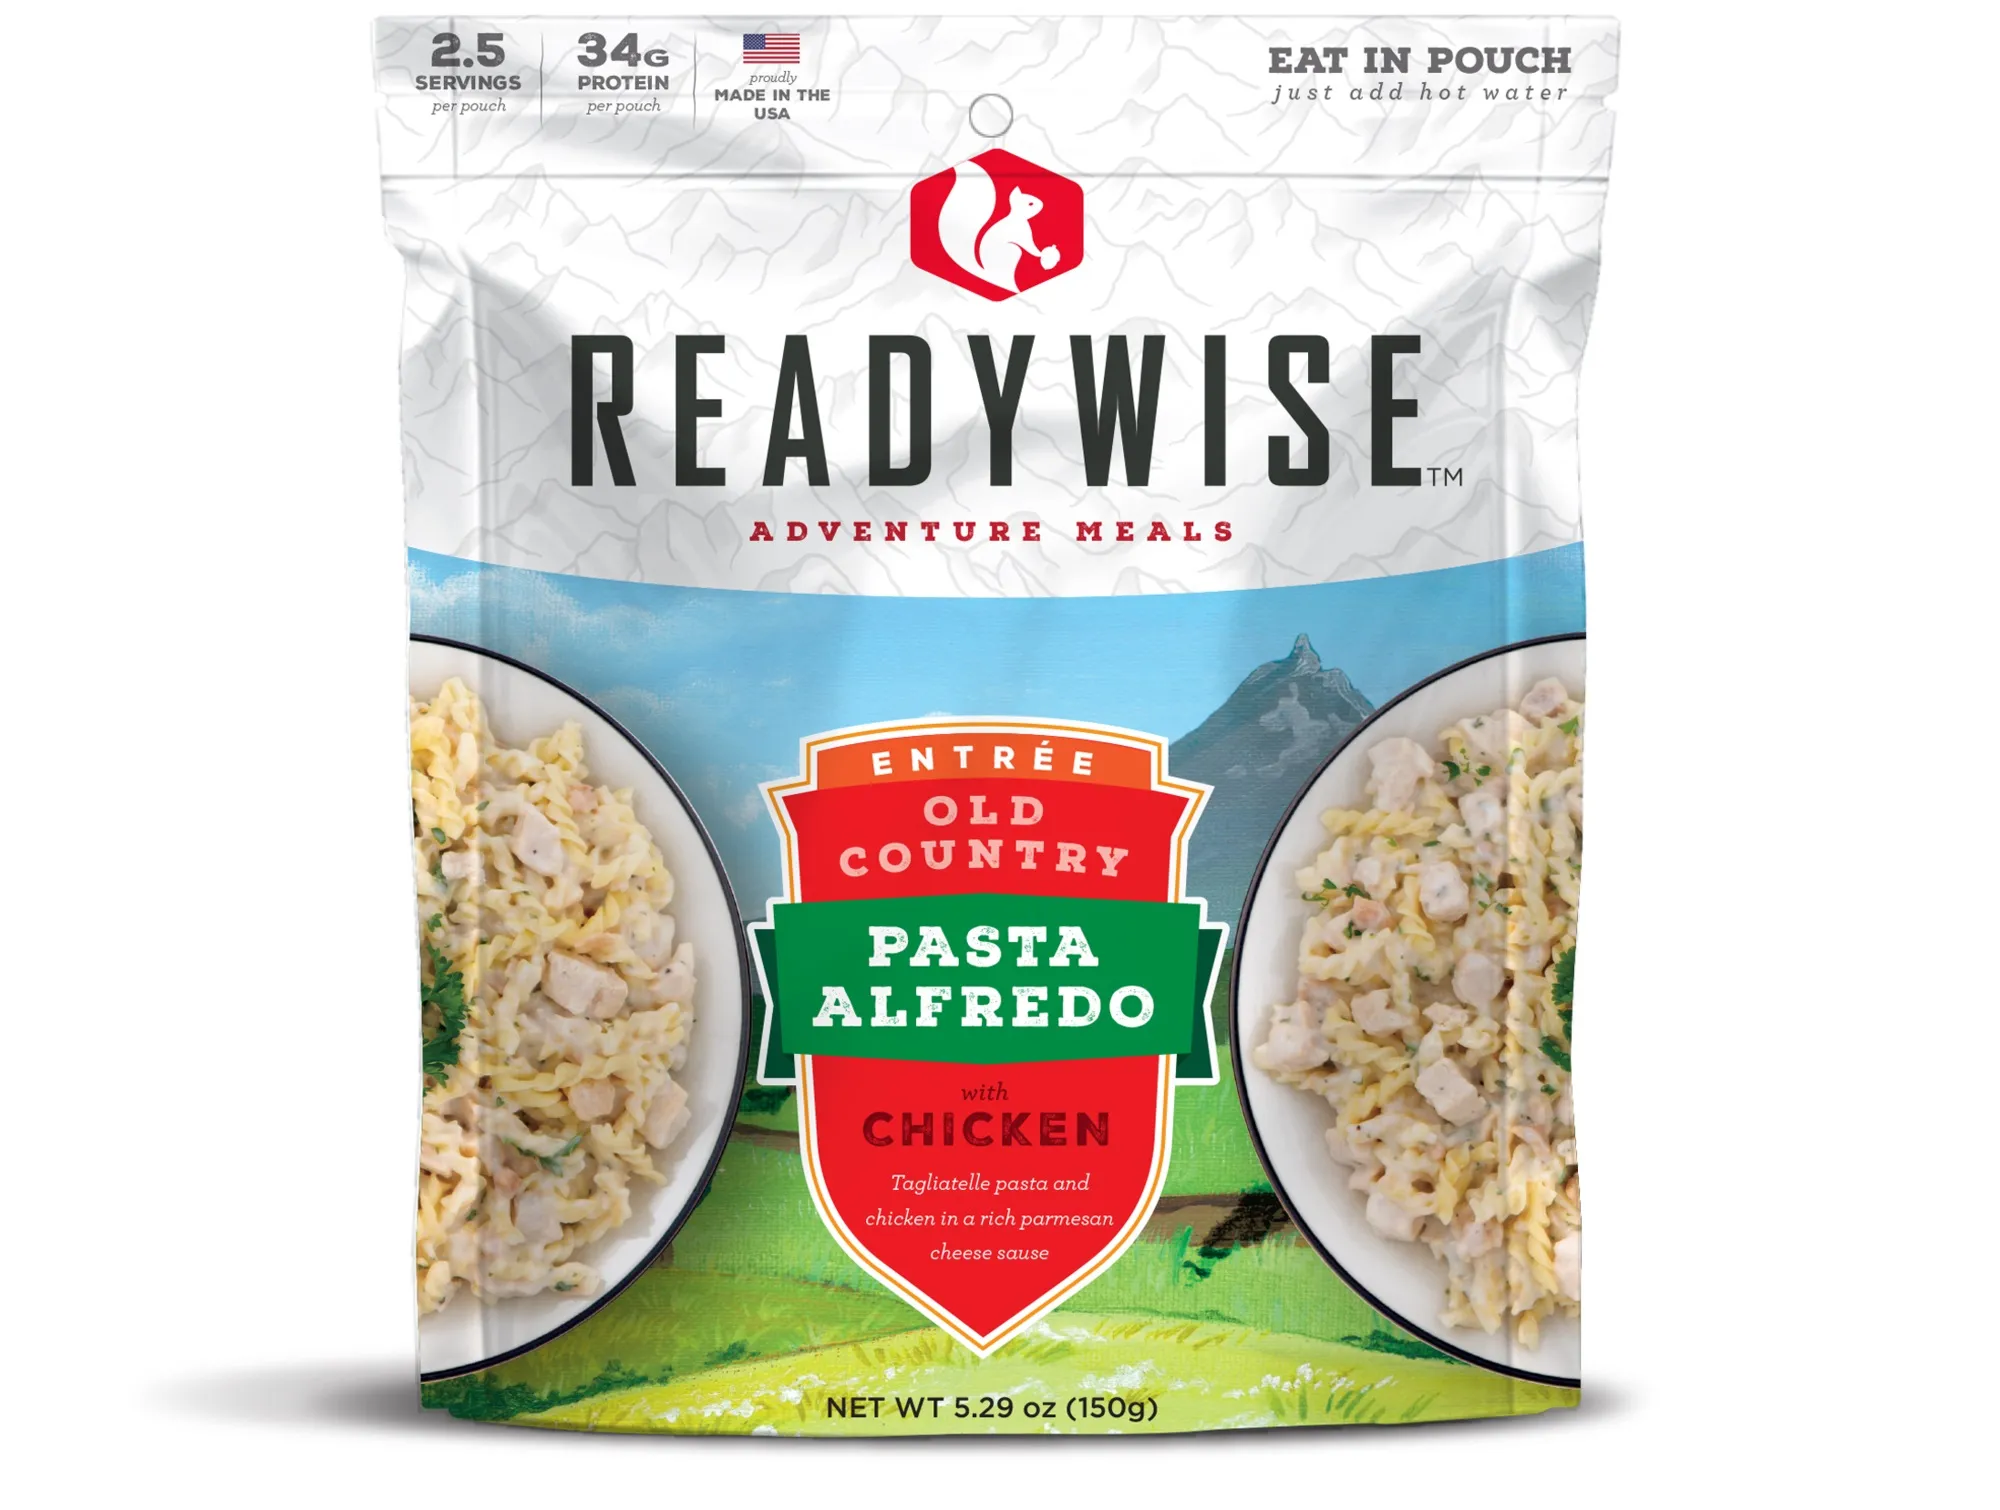 Ready Wise - RW05-002 - Old Country Pasta Alfredo With Chicken